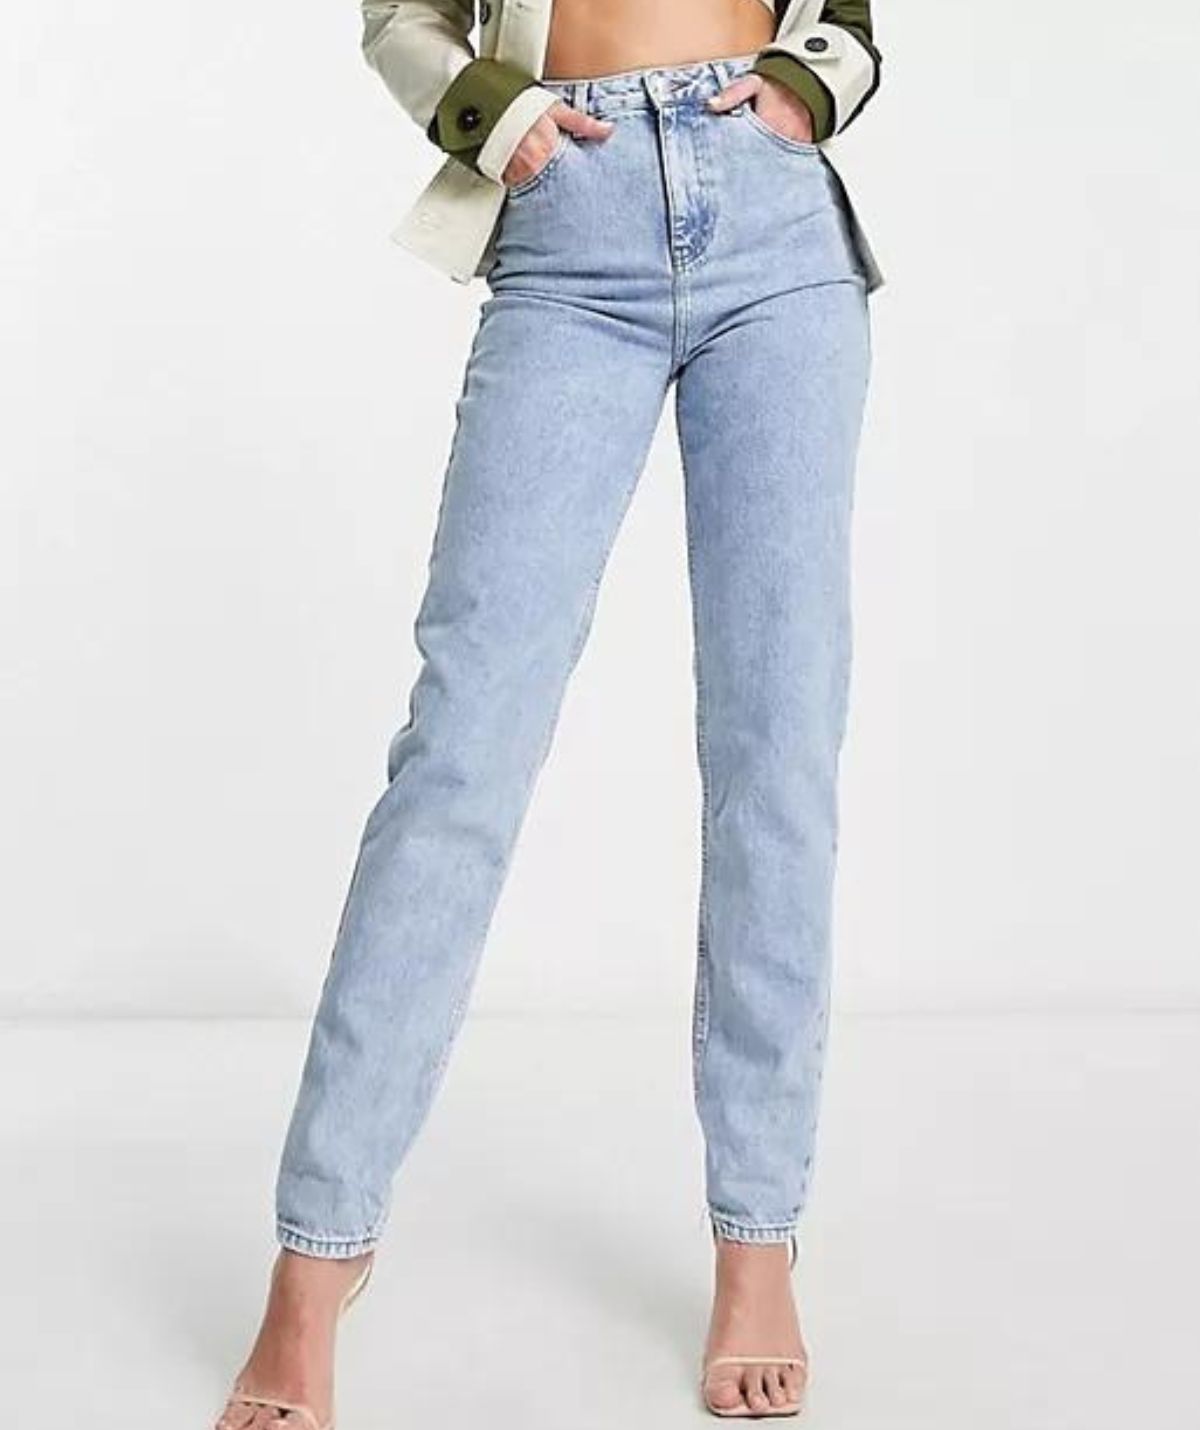 Which Jean Style Will Suit My Body Shape?